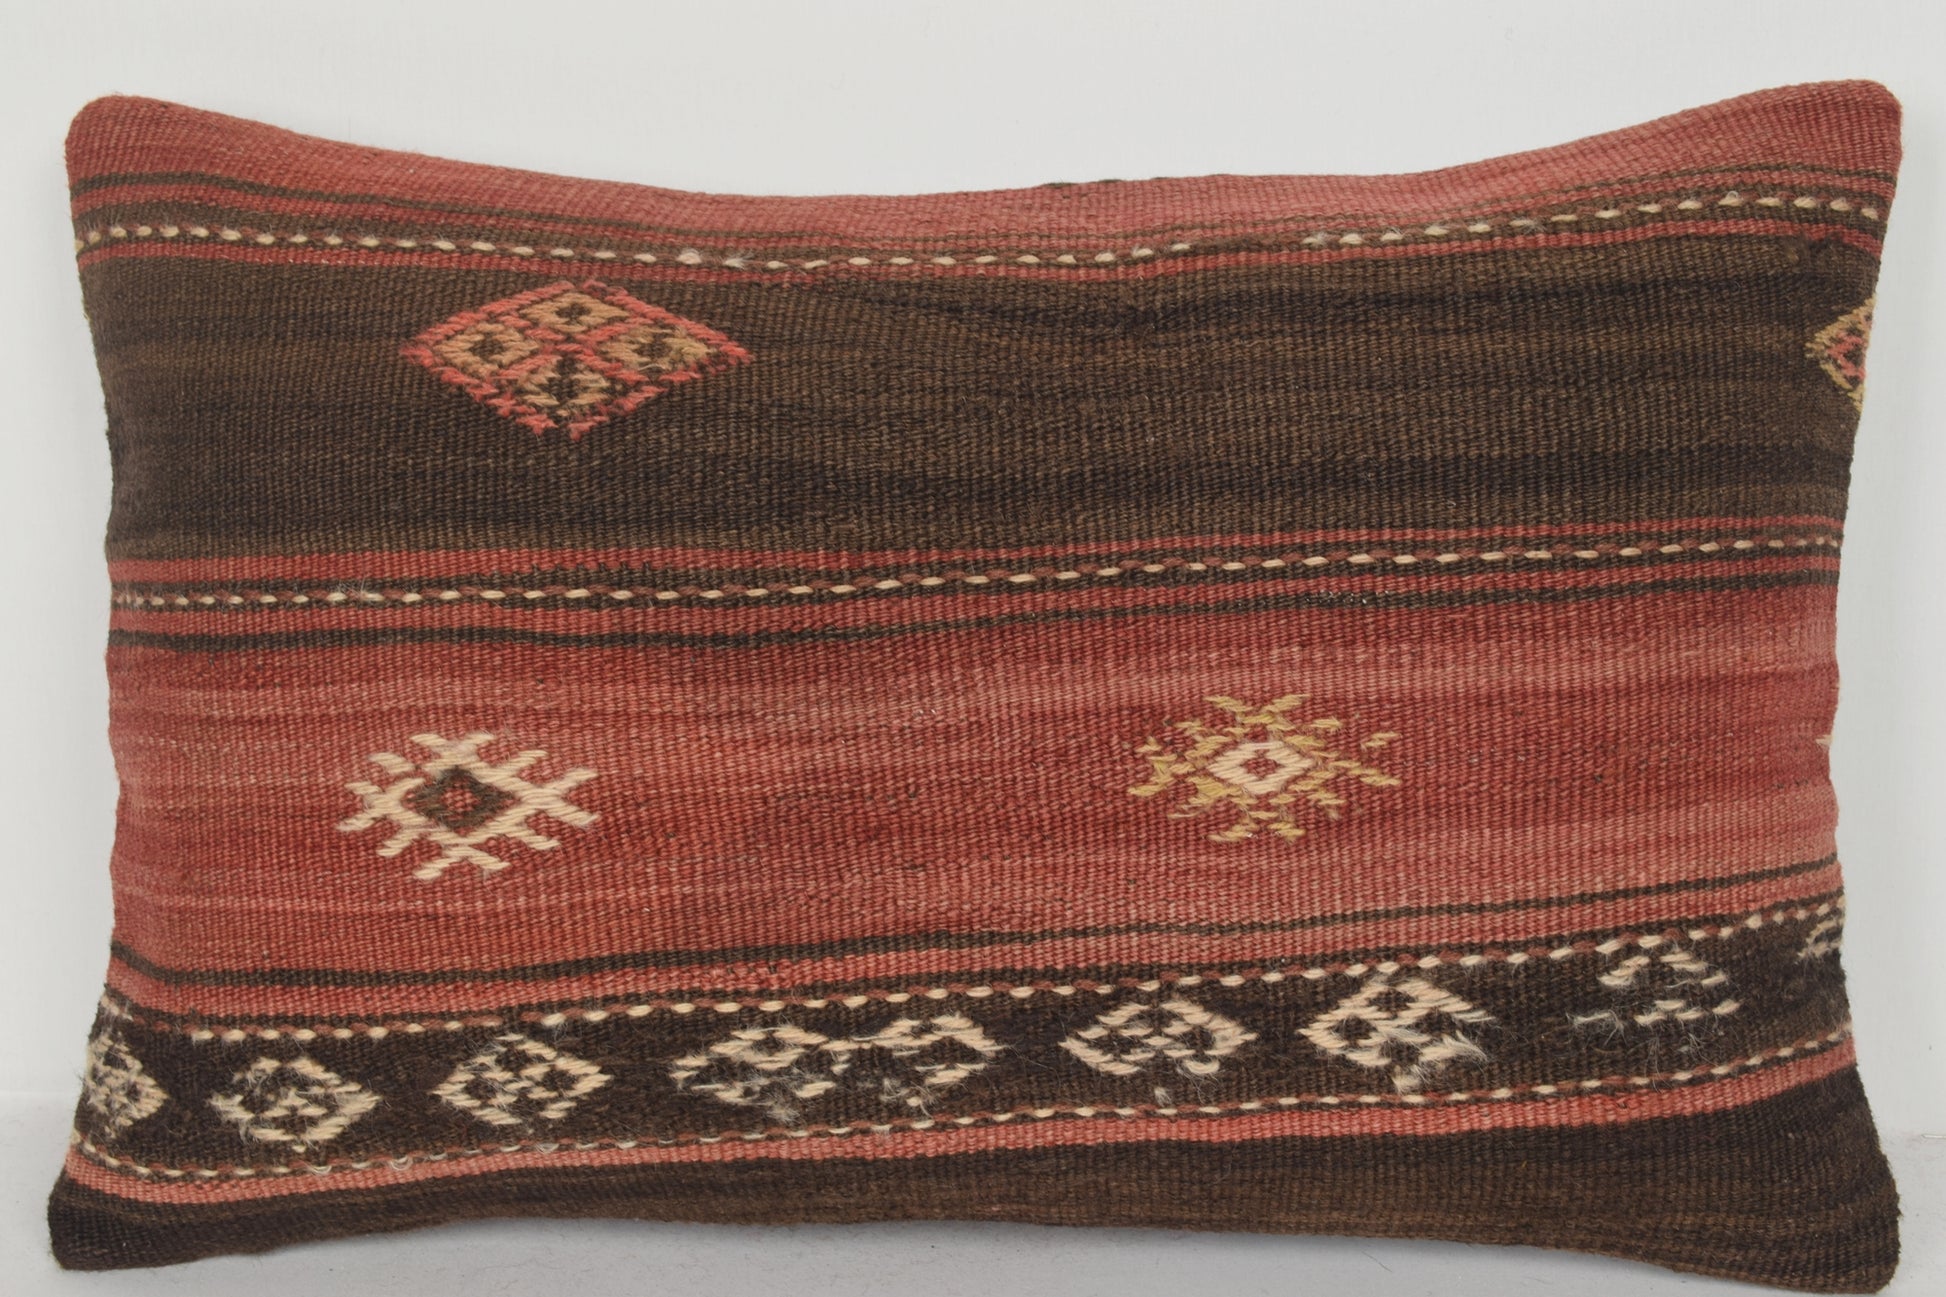 Kilim Cushions for sale E00591 Lumbar Knitted Furniture Hand Crafted